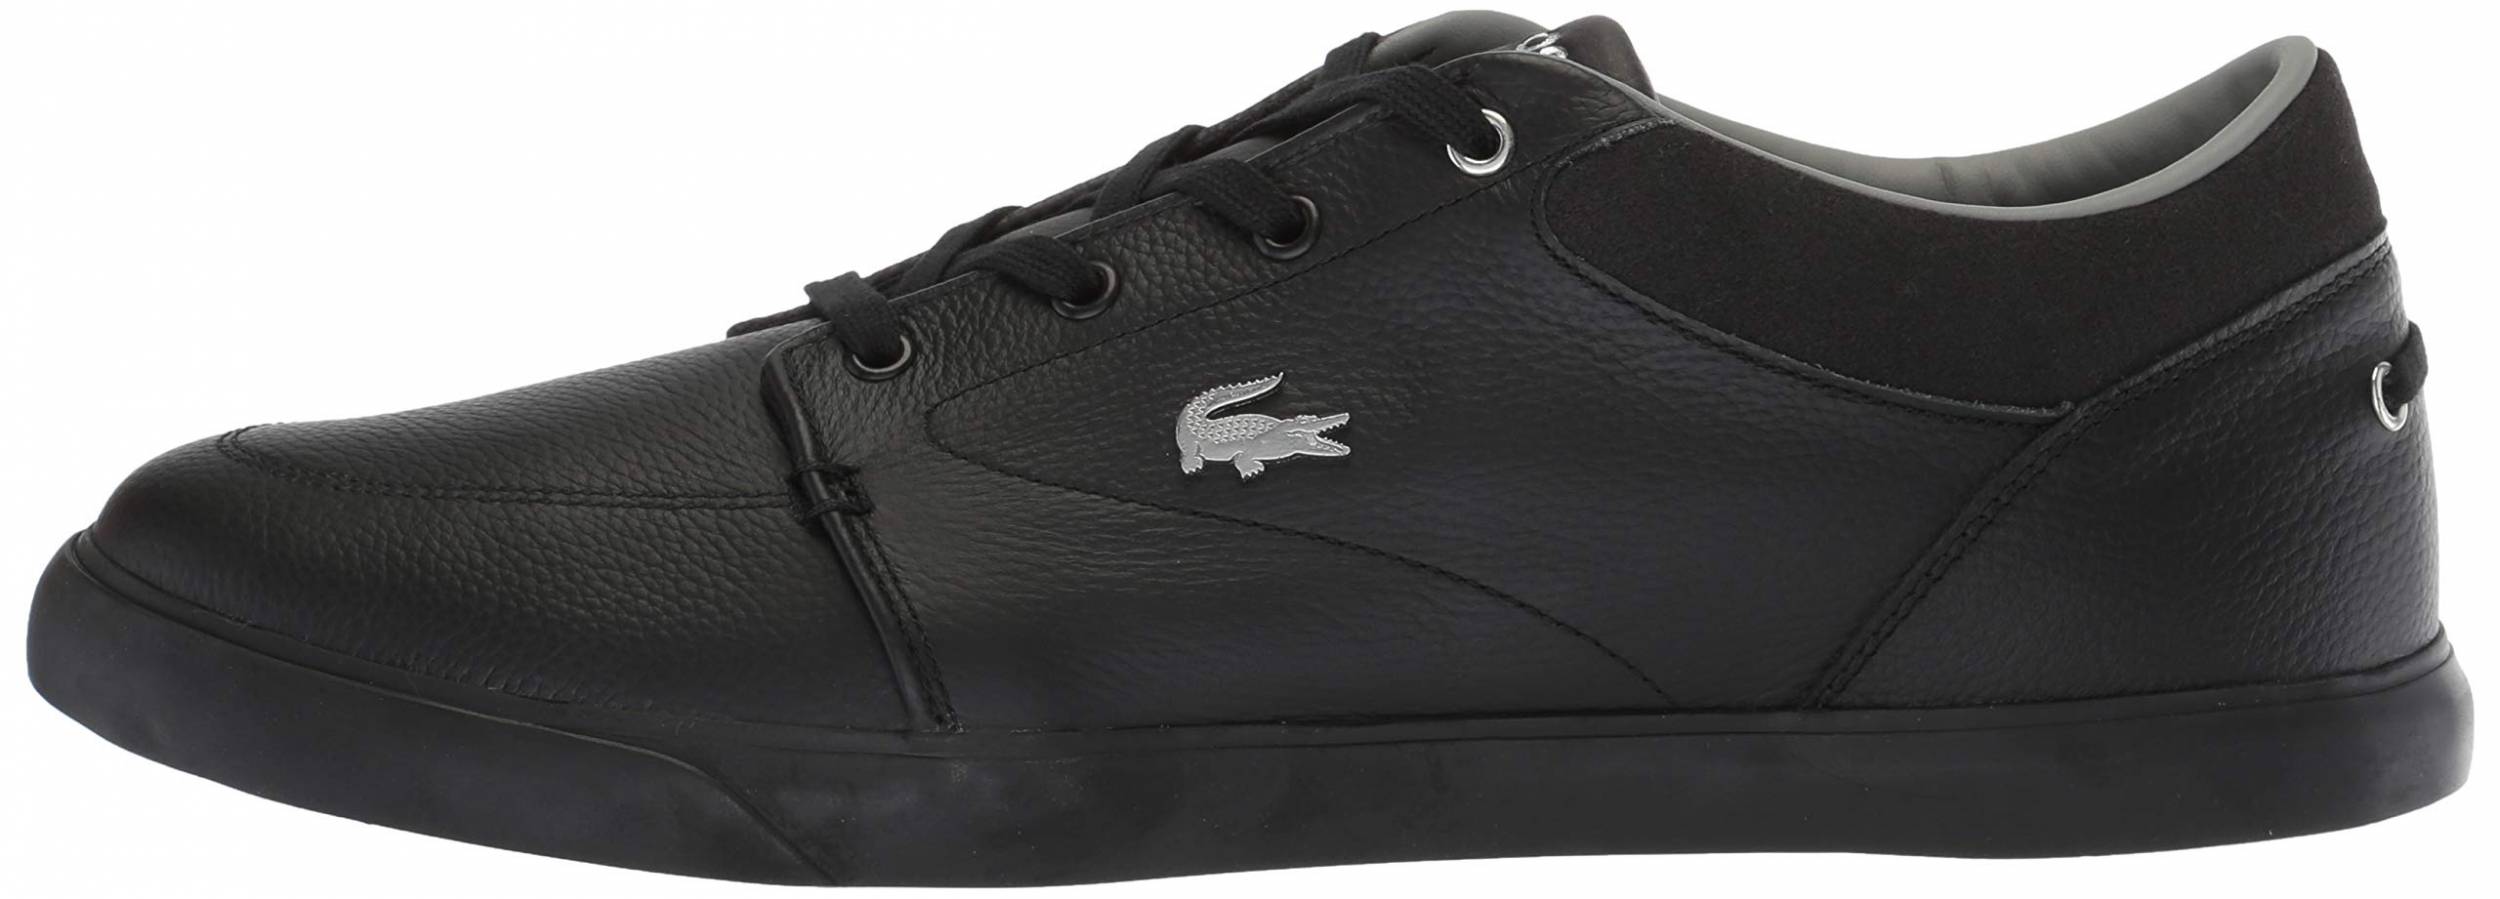 mens black leather lacoste trainers